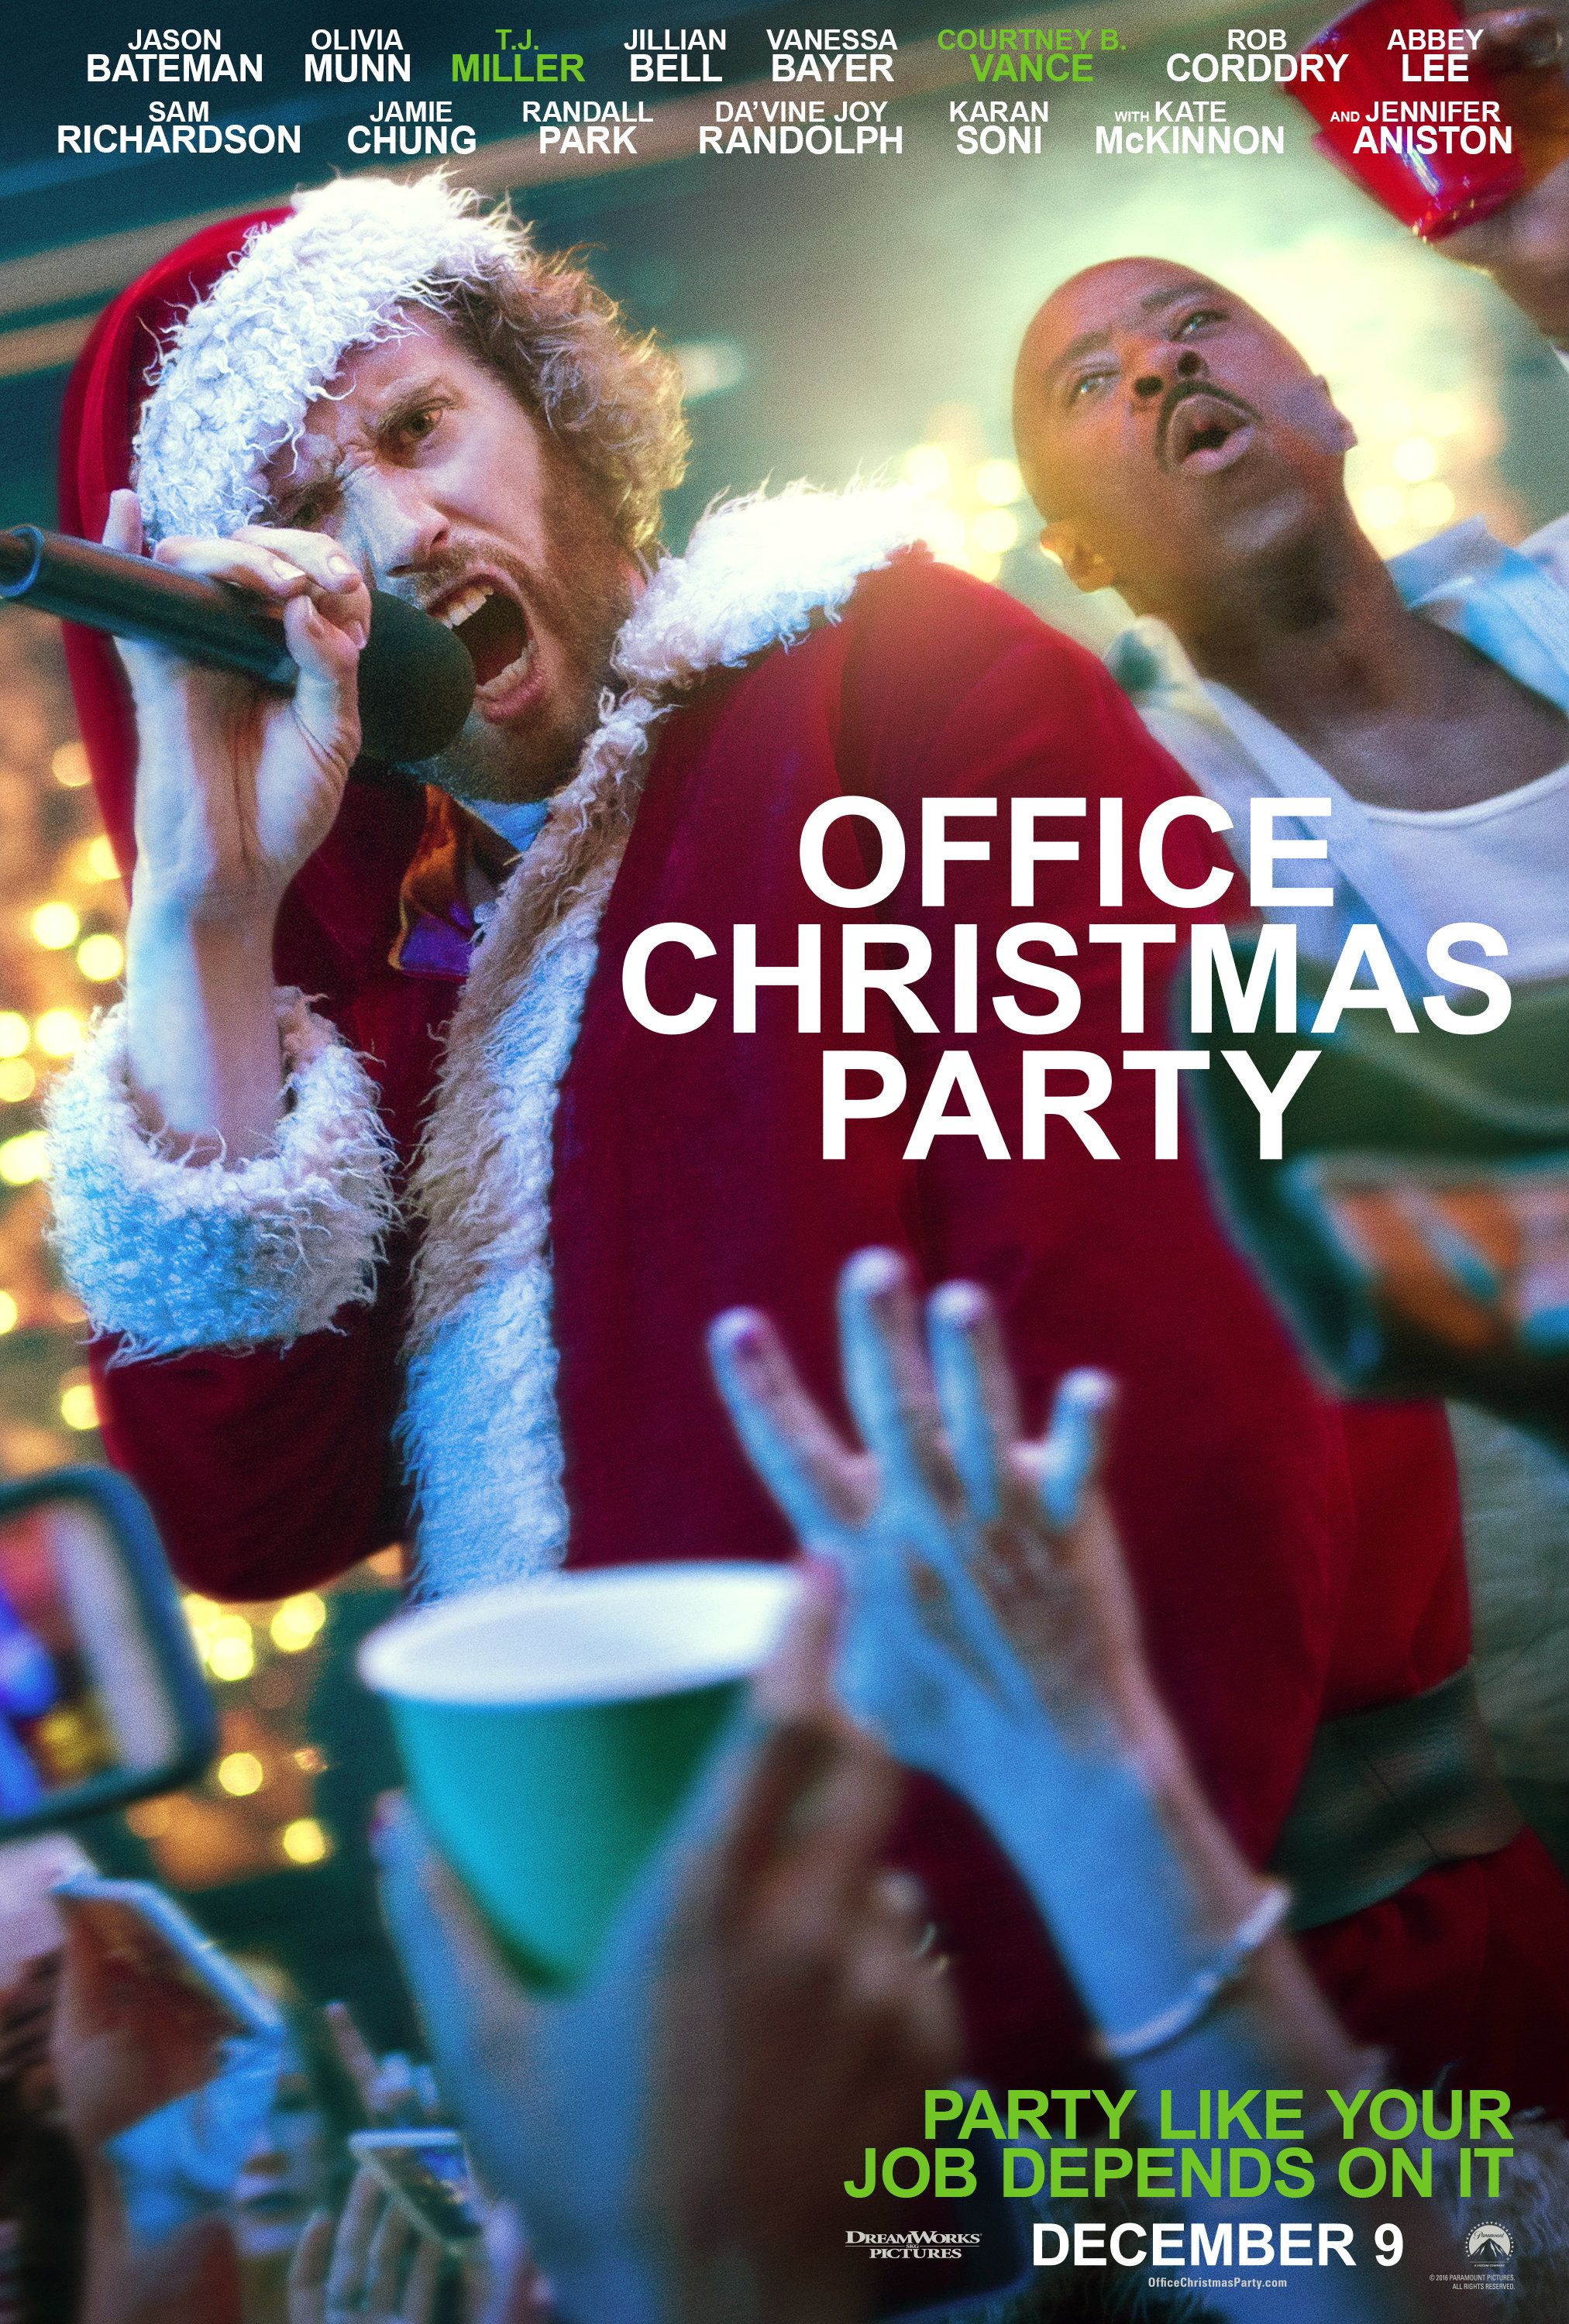 Office Christmas Party Poster -T.J. Miller